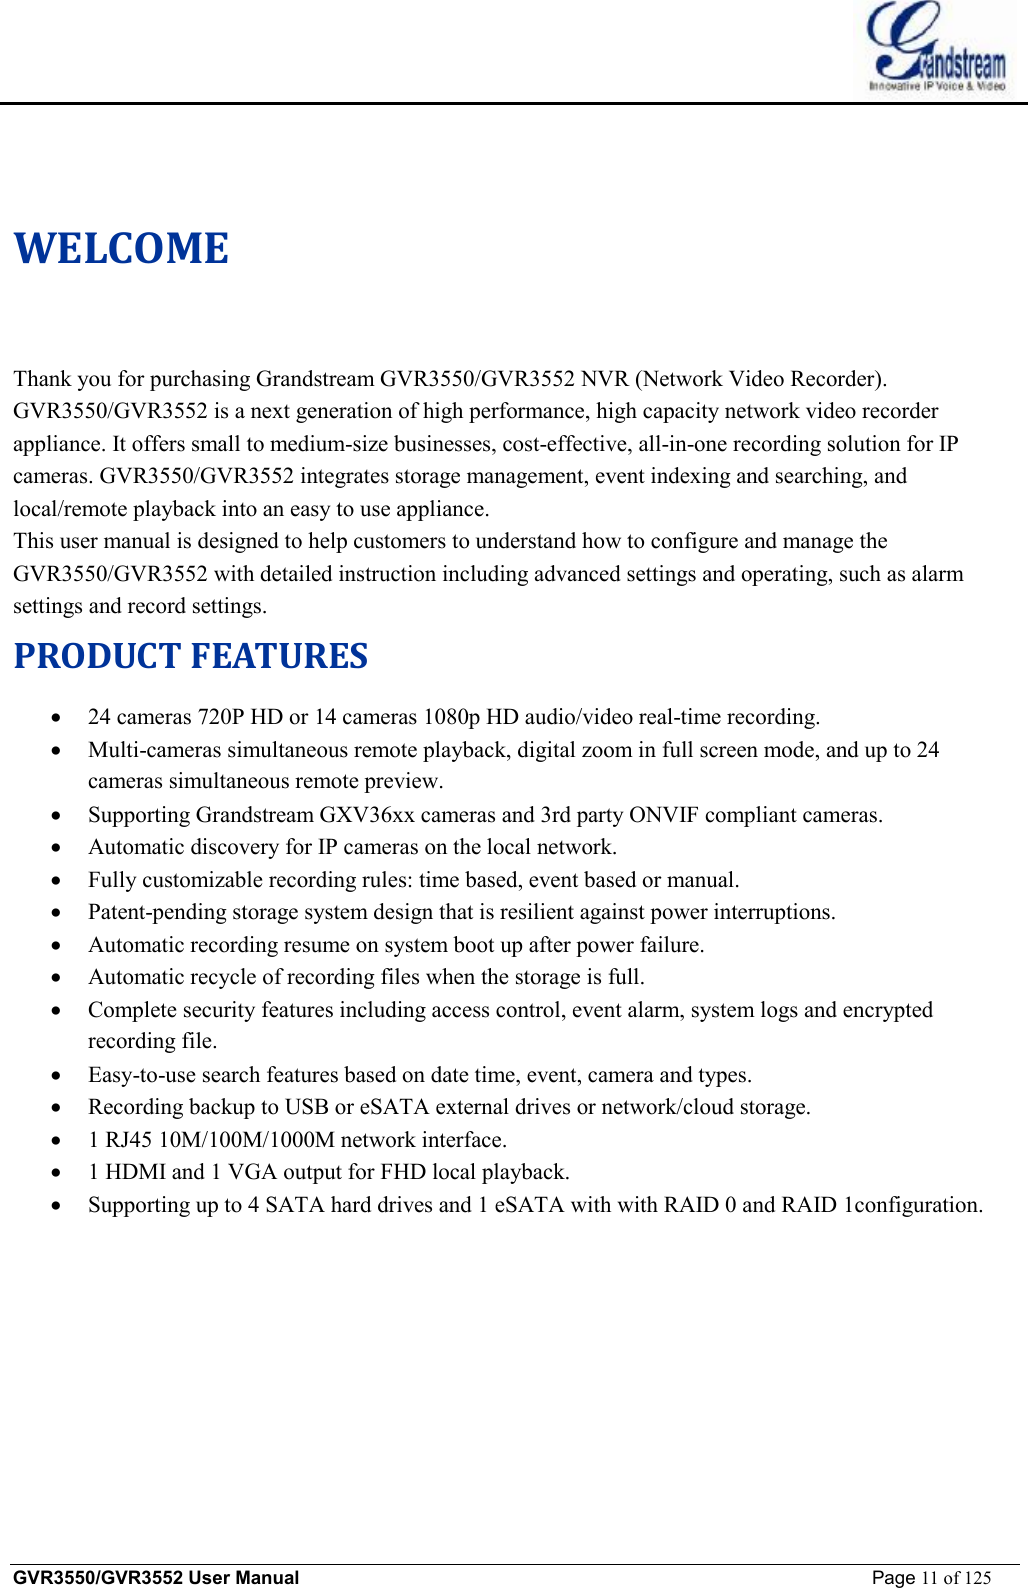    GVR3550/GVR3552 User Manual                                                             Page 11 of 125        WELCOME Thank you for purchasing Grandstream GVR3550/GVR3552 NVR (Network Video Recorder).  GVR3550/GVR3552 is a next generation of high performance, high capacity network video recorder appliance. It offers small to medium-size businesses, cost-effective, all-in-one recording solution for IP cameras. GVR3550/GVR3552 integrates storage management, event indexing and searching, and local/remote playback into an easy to use appliance. This user manual is designed to help customers to understand how to configure and manage the GVR3550/GVR3552 with detailed instruction including advanced settings and operating, such as alarm settings and record settings. PRODUCT FEATURES · 24 cameras 720P HD or 14 cameras 1080p HD audio/video real-time recording. · Multi-cameras simultaneous remote playback, digital zoom in full screen mode, and up to 24 cameras simultaneous remote preview. · Supporting Grandstream GXV36xx cameras and 3rd party ONVIF compliant cameras. · Automatic discovery for IP cameras on the local network. · Fully customizable recording rules: time based, event based or manual. · Patent-pending storage system design that is resilient against power interruptions. · Automatic recording resume on system boot up after power failure. · Automatic recycle of recording files when the storage is full. · Complete security features including access control, event alarm, system logs and encrypted recording file. · Easy-to-use search features based on date time, event, camera and types.  · Recording backup to USB or eSATA external drives or network/cloud storage. · 1 RJ45 10M/100M/1000M network interface. · 1 HDMI and 1 VGA output for FHD local playback. · Supporting up to 4 SATA hard drives and 1 eSATA with with RAID 0 and RAID 1configuration. 